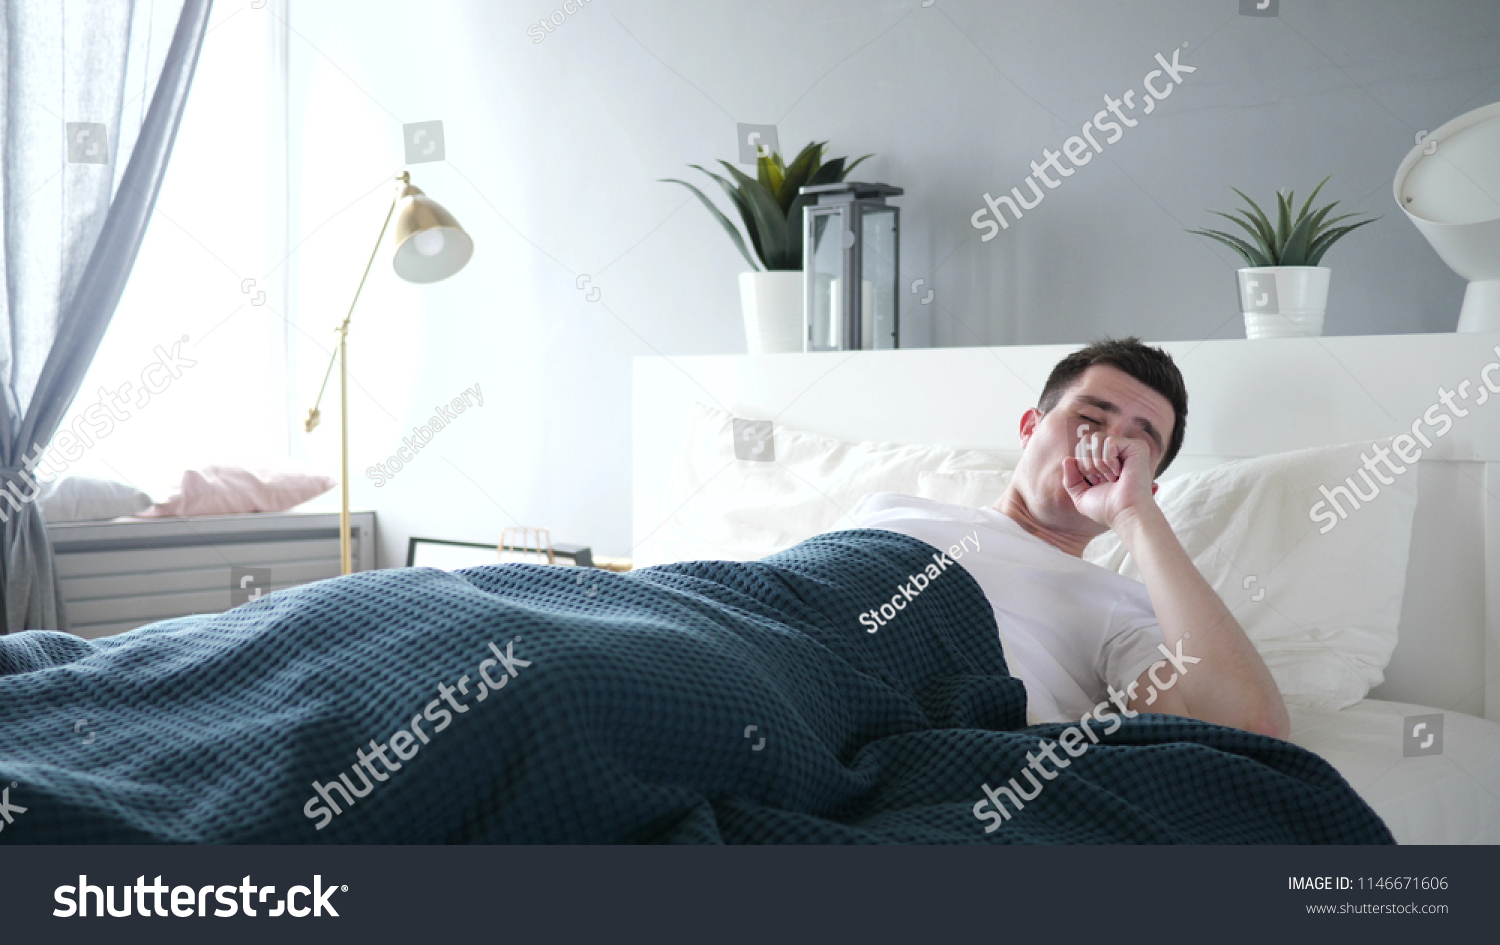 Sick Man Coughing While Sleeping Bed Stock Photo 1146671606 | Shutterstock